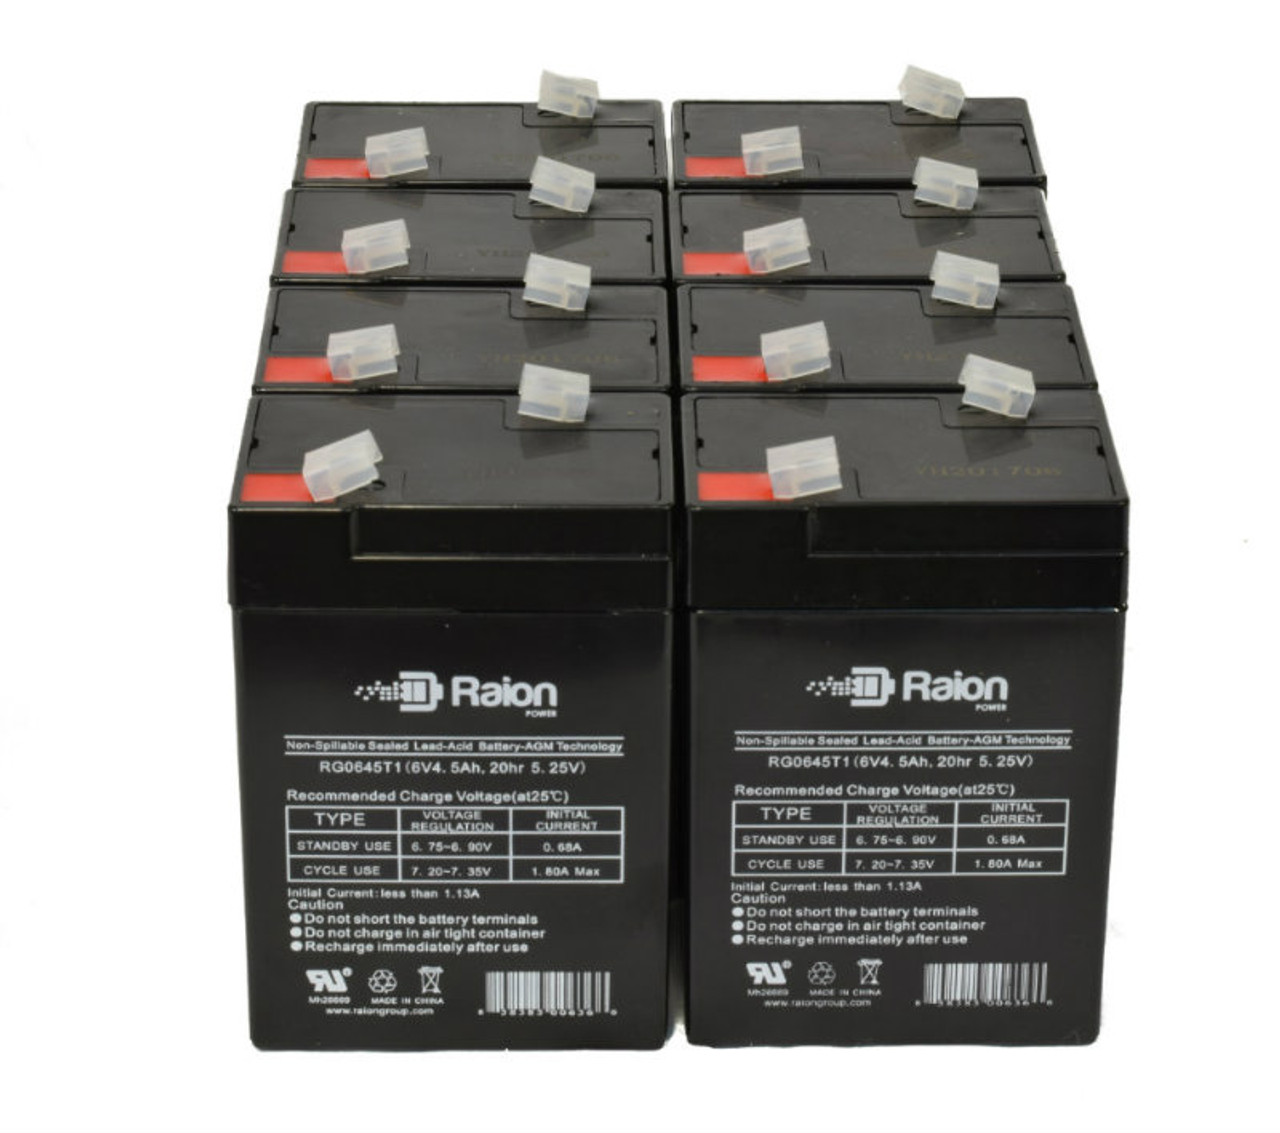 Raion Power 6 Volt 4.5Ah RG0645T1 Replacement Battery for MaxPower NP4-6 - 8 Pack